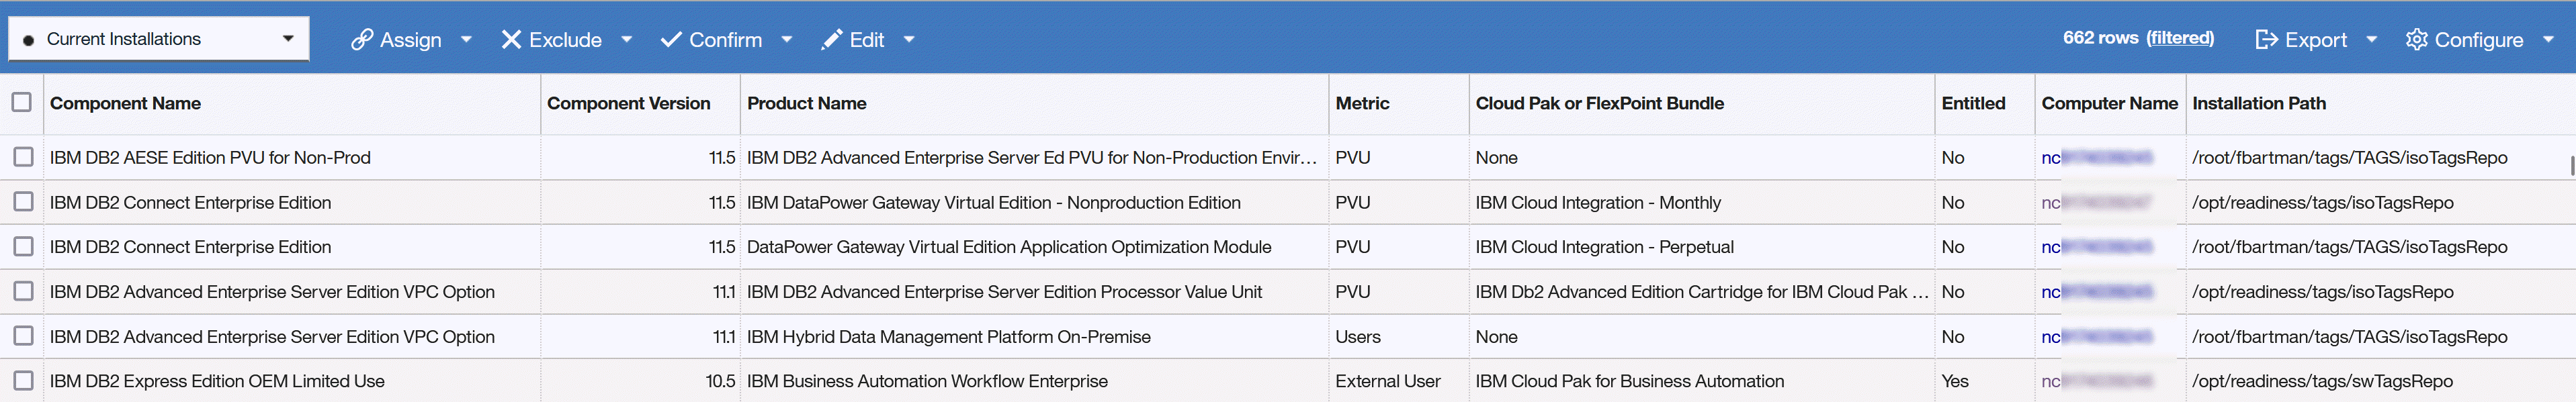 Software Classification panel